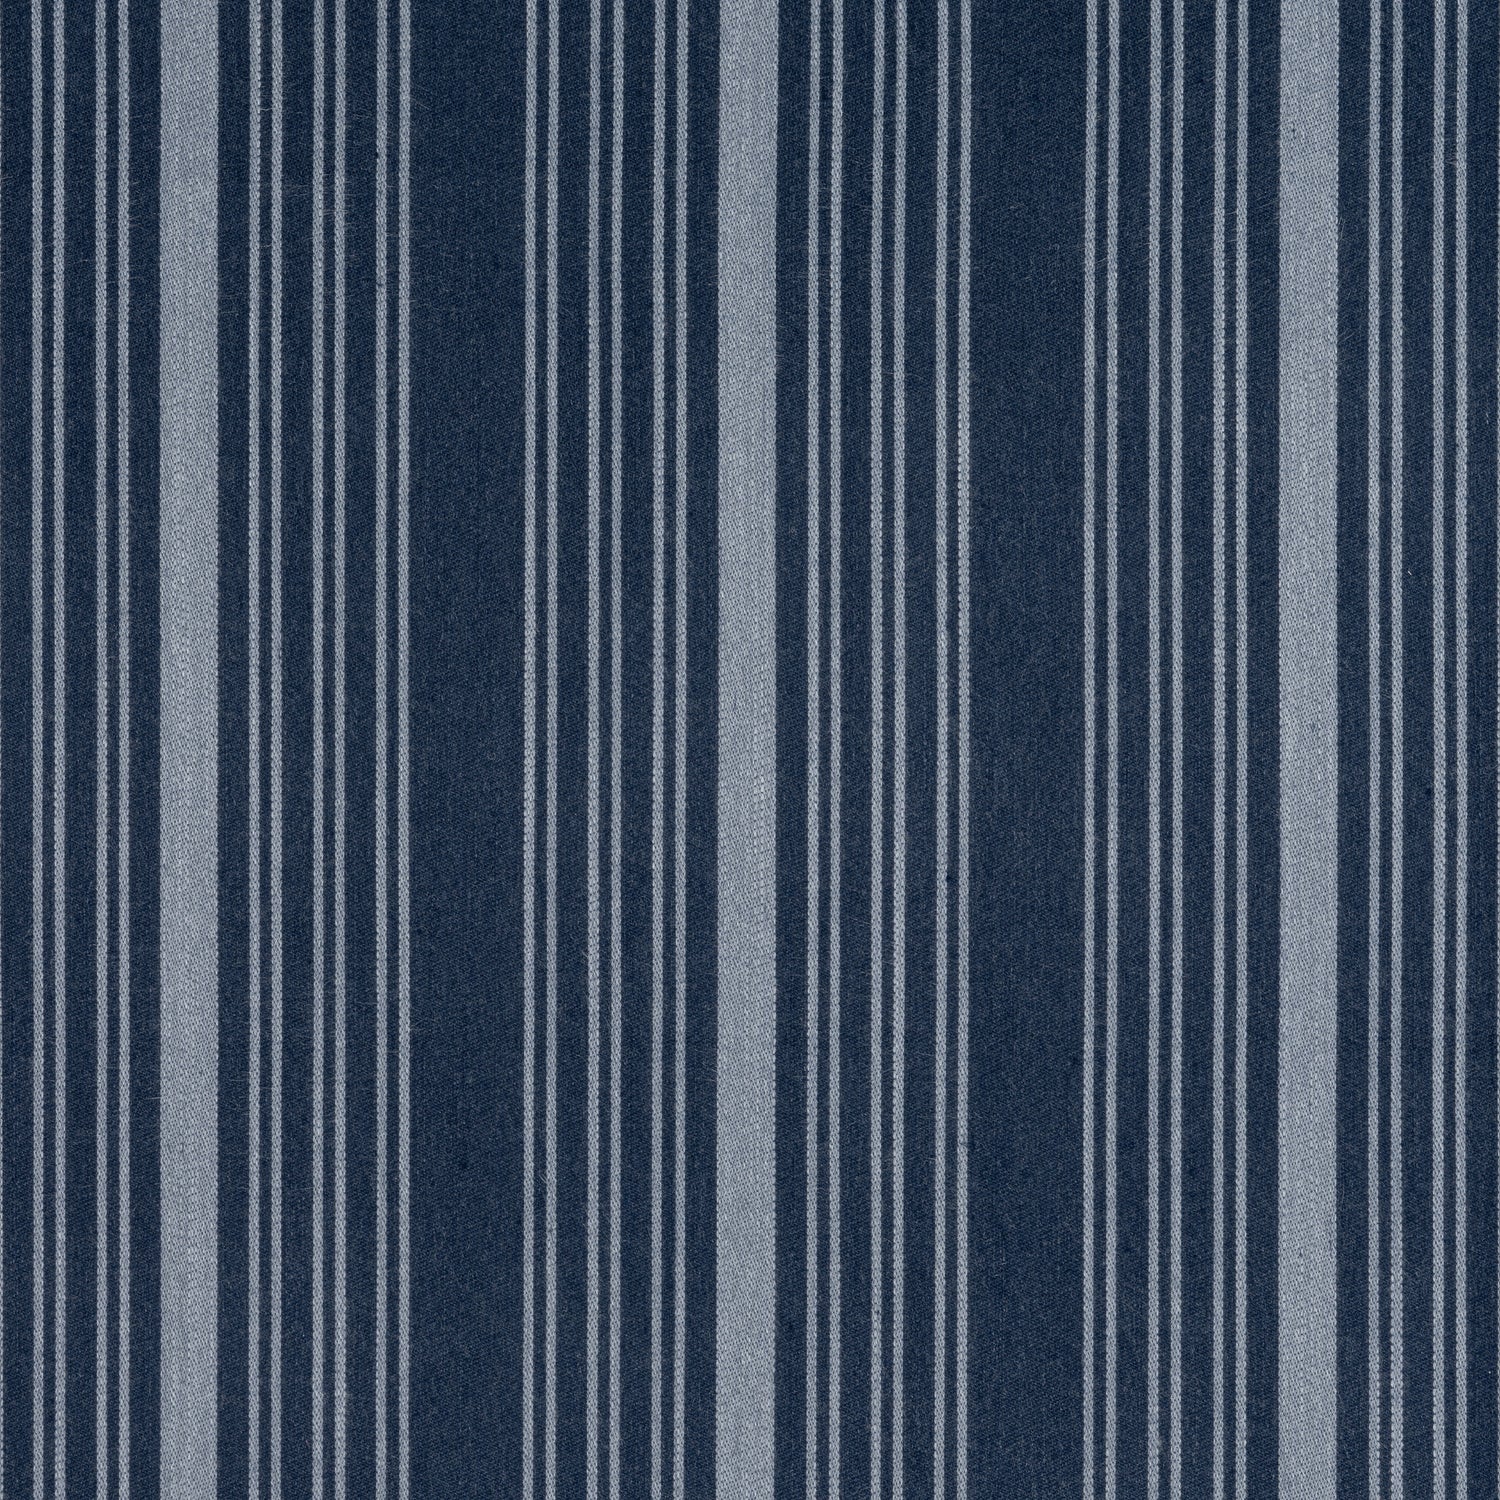 Kaia Stripe fabric in marine color - pattern number W8539 - by Thibaut in the Villa collection